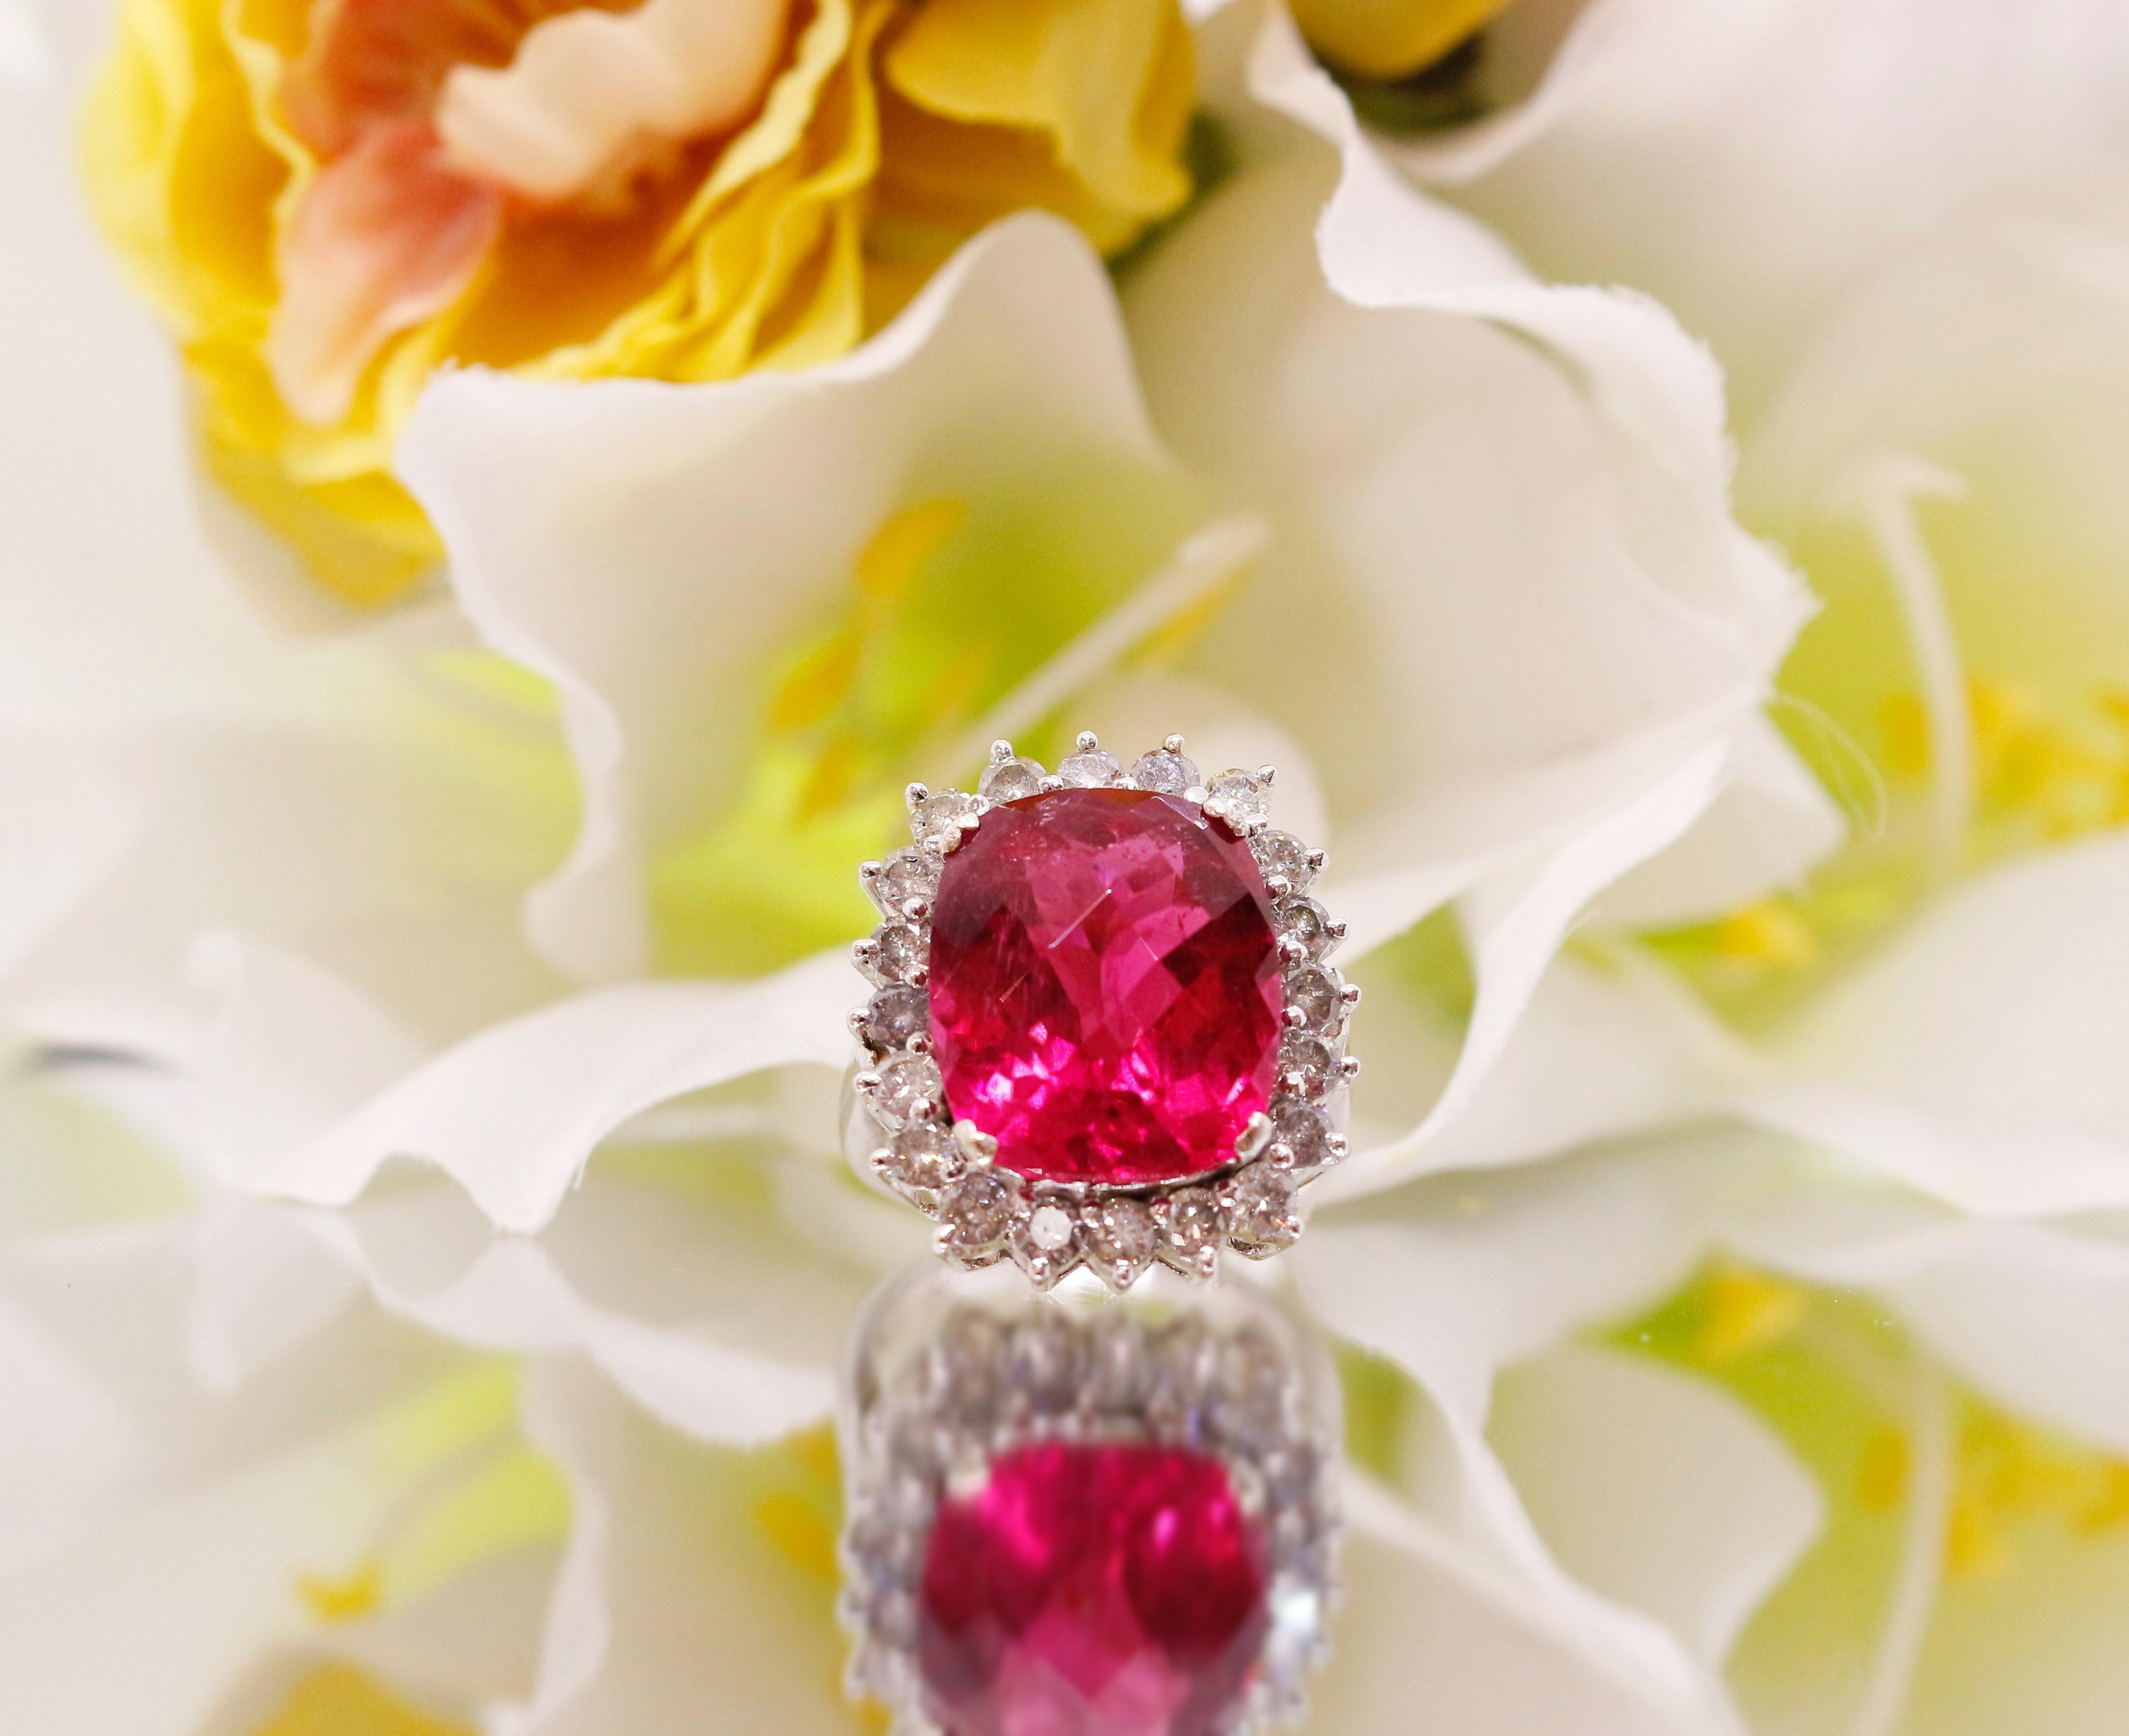 ◆Detail description◆

◆Solid 18kt White Gold(shown in picture)

◆Tourmaline Weight: 19.50 CT

◆Diamond Carat: 1.5 CT

◆Diamond Shape: Round cut mixed

◆Total Weight: 10.8 Gram

Tourmaline is a gemstone renowned for its vibrant colors and unique